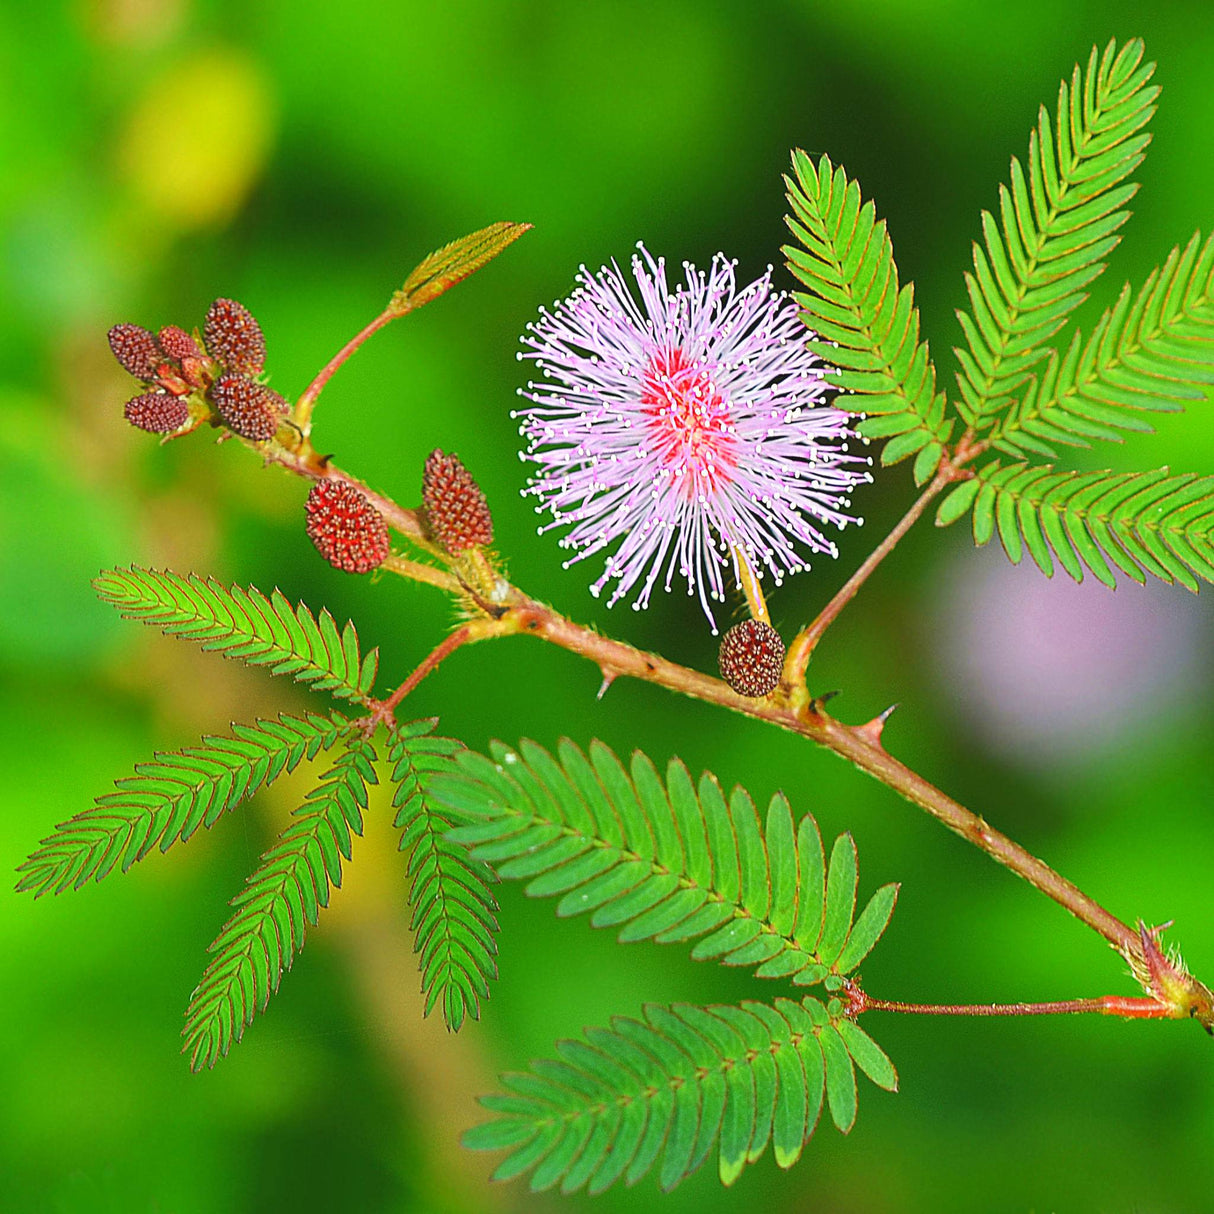 Touch-Me-Not "Mimosa Pudica"